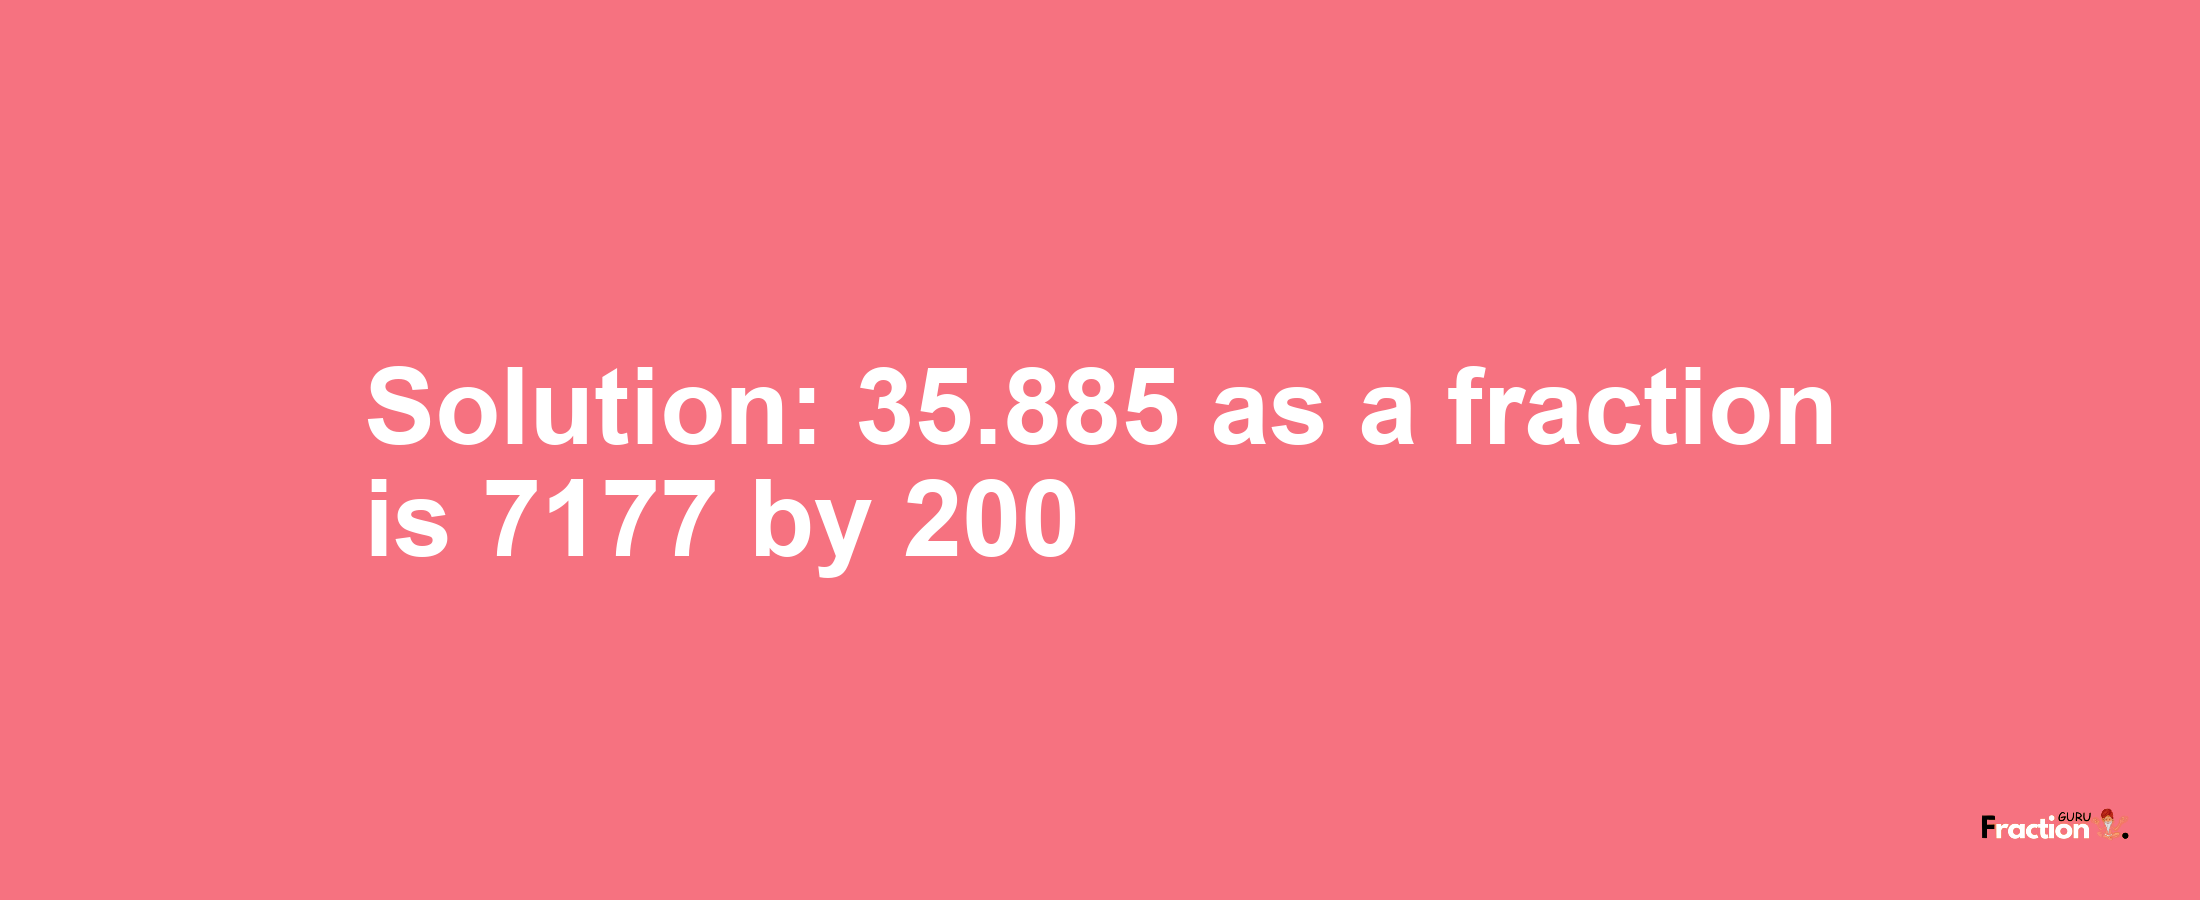 Solution:35.885 as a fraction is 7177/200